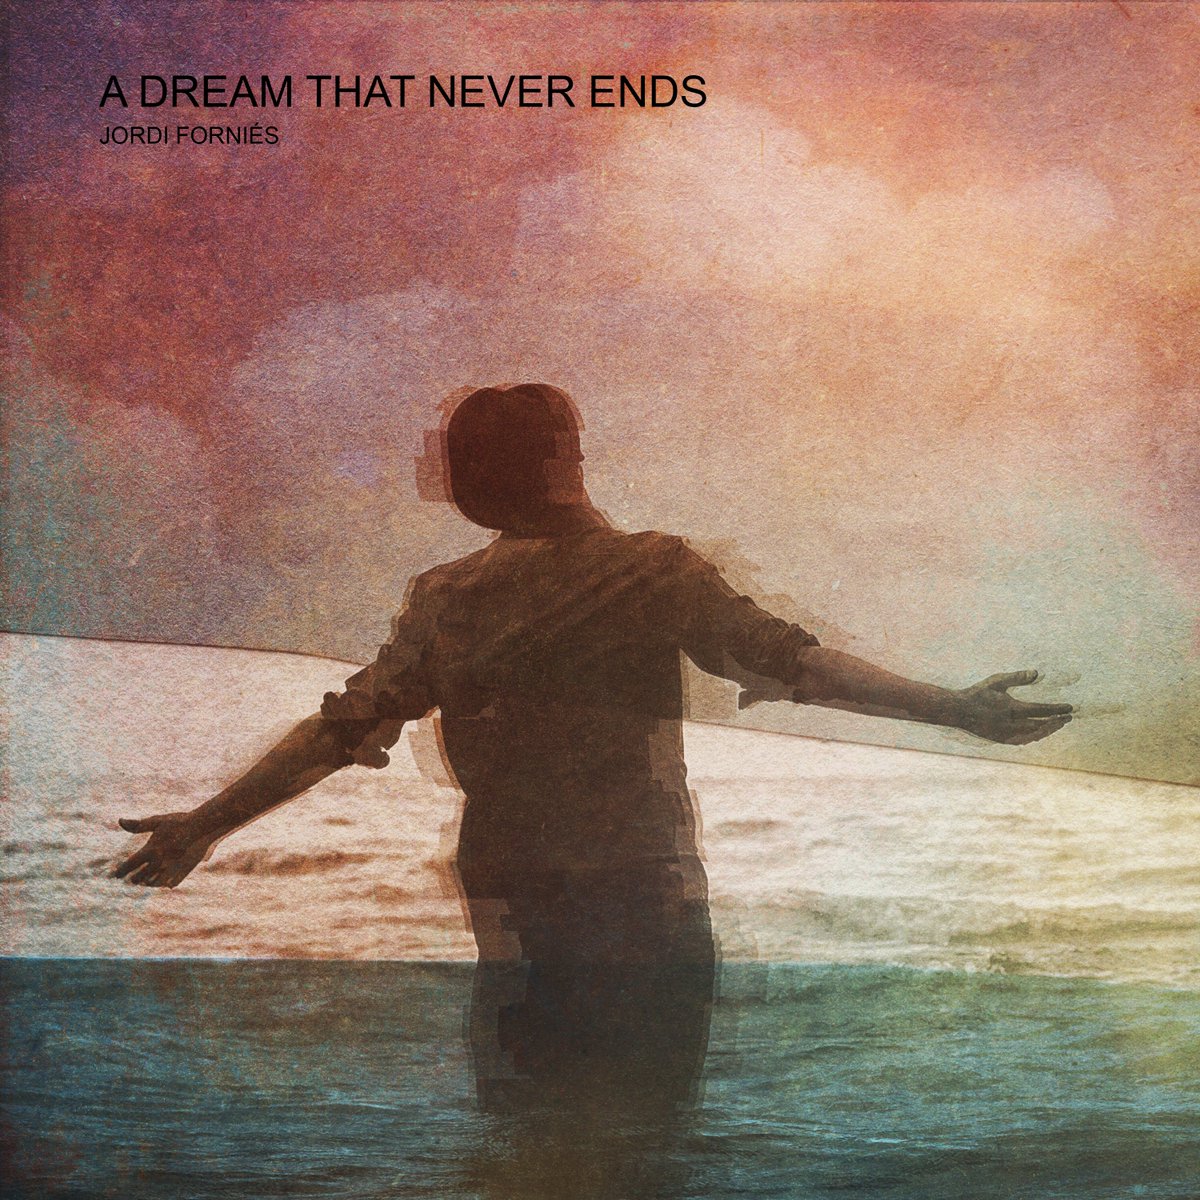 My new single 'A Dream that Never Ends' is available in all the streaming platforms. Hope you like it! modernclassicalx.lnk.to/adreamthatneve…